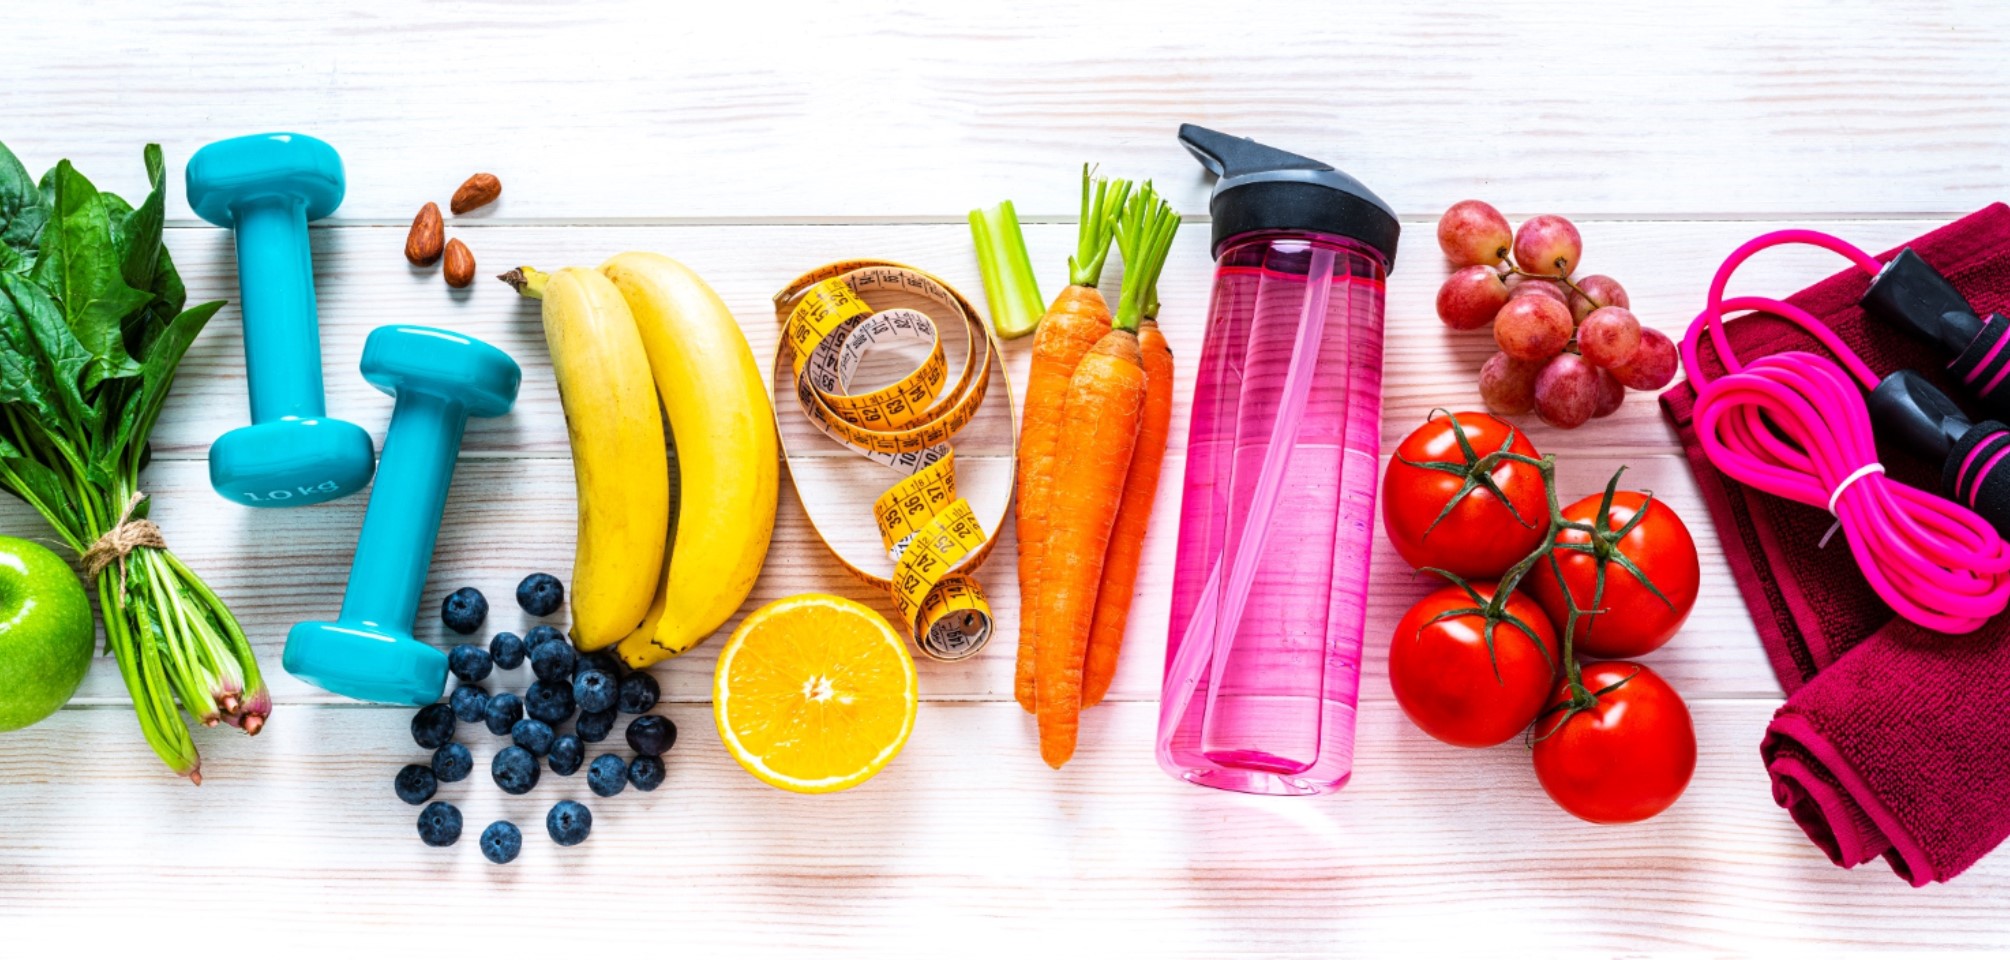 photo features a mix of fruits and vegetables alongside hand weights, a water bottle and other fitness items